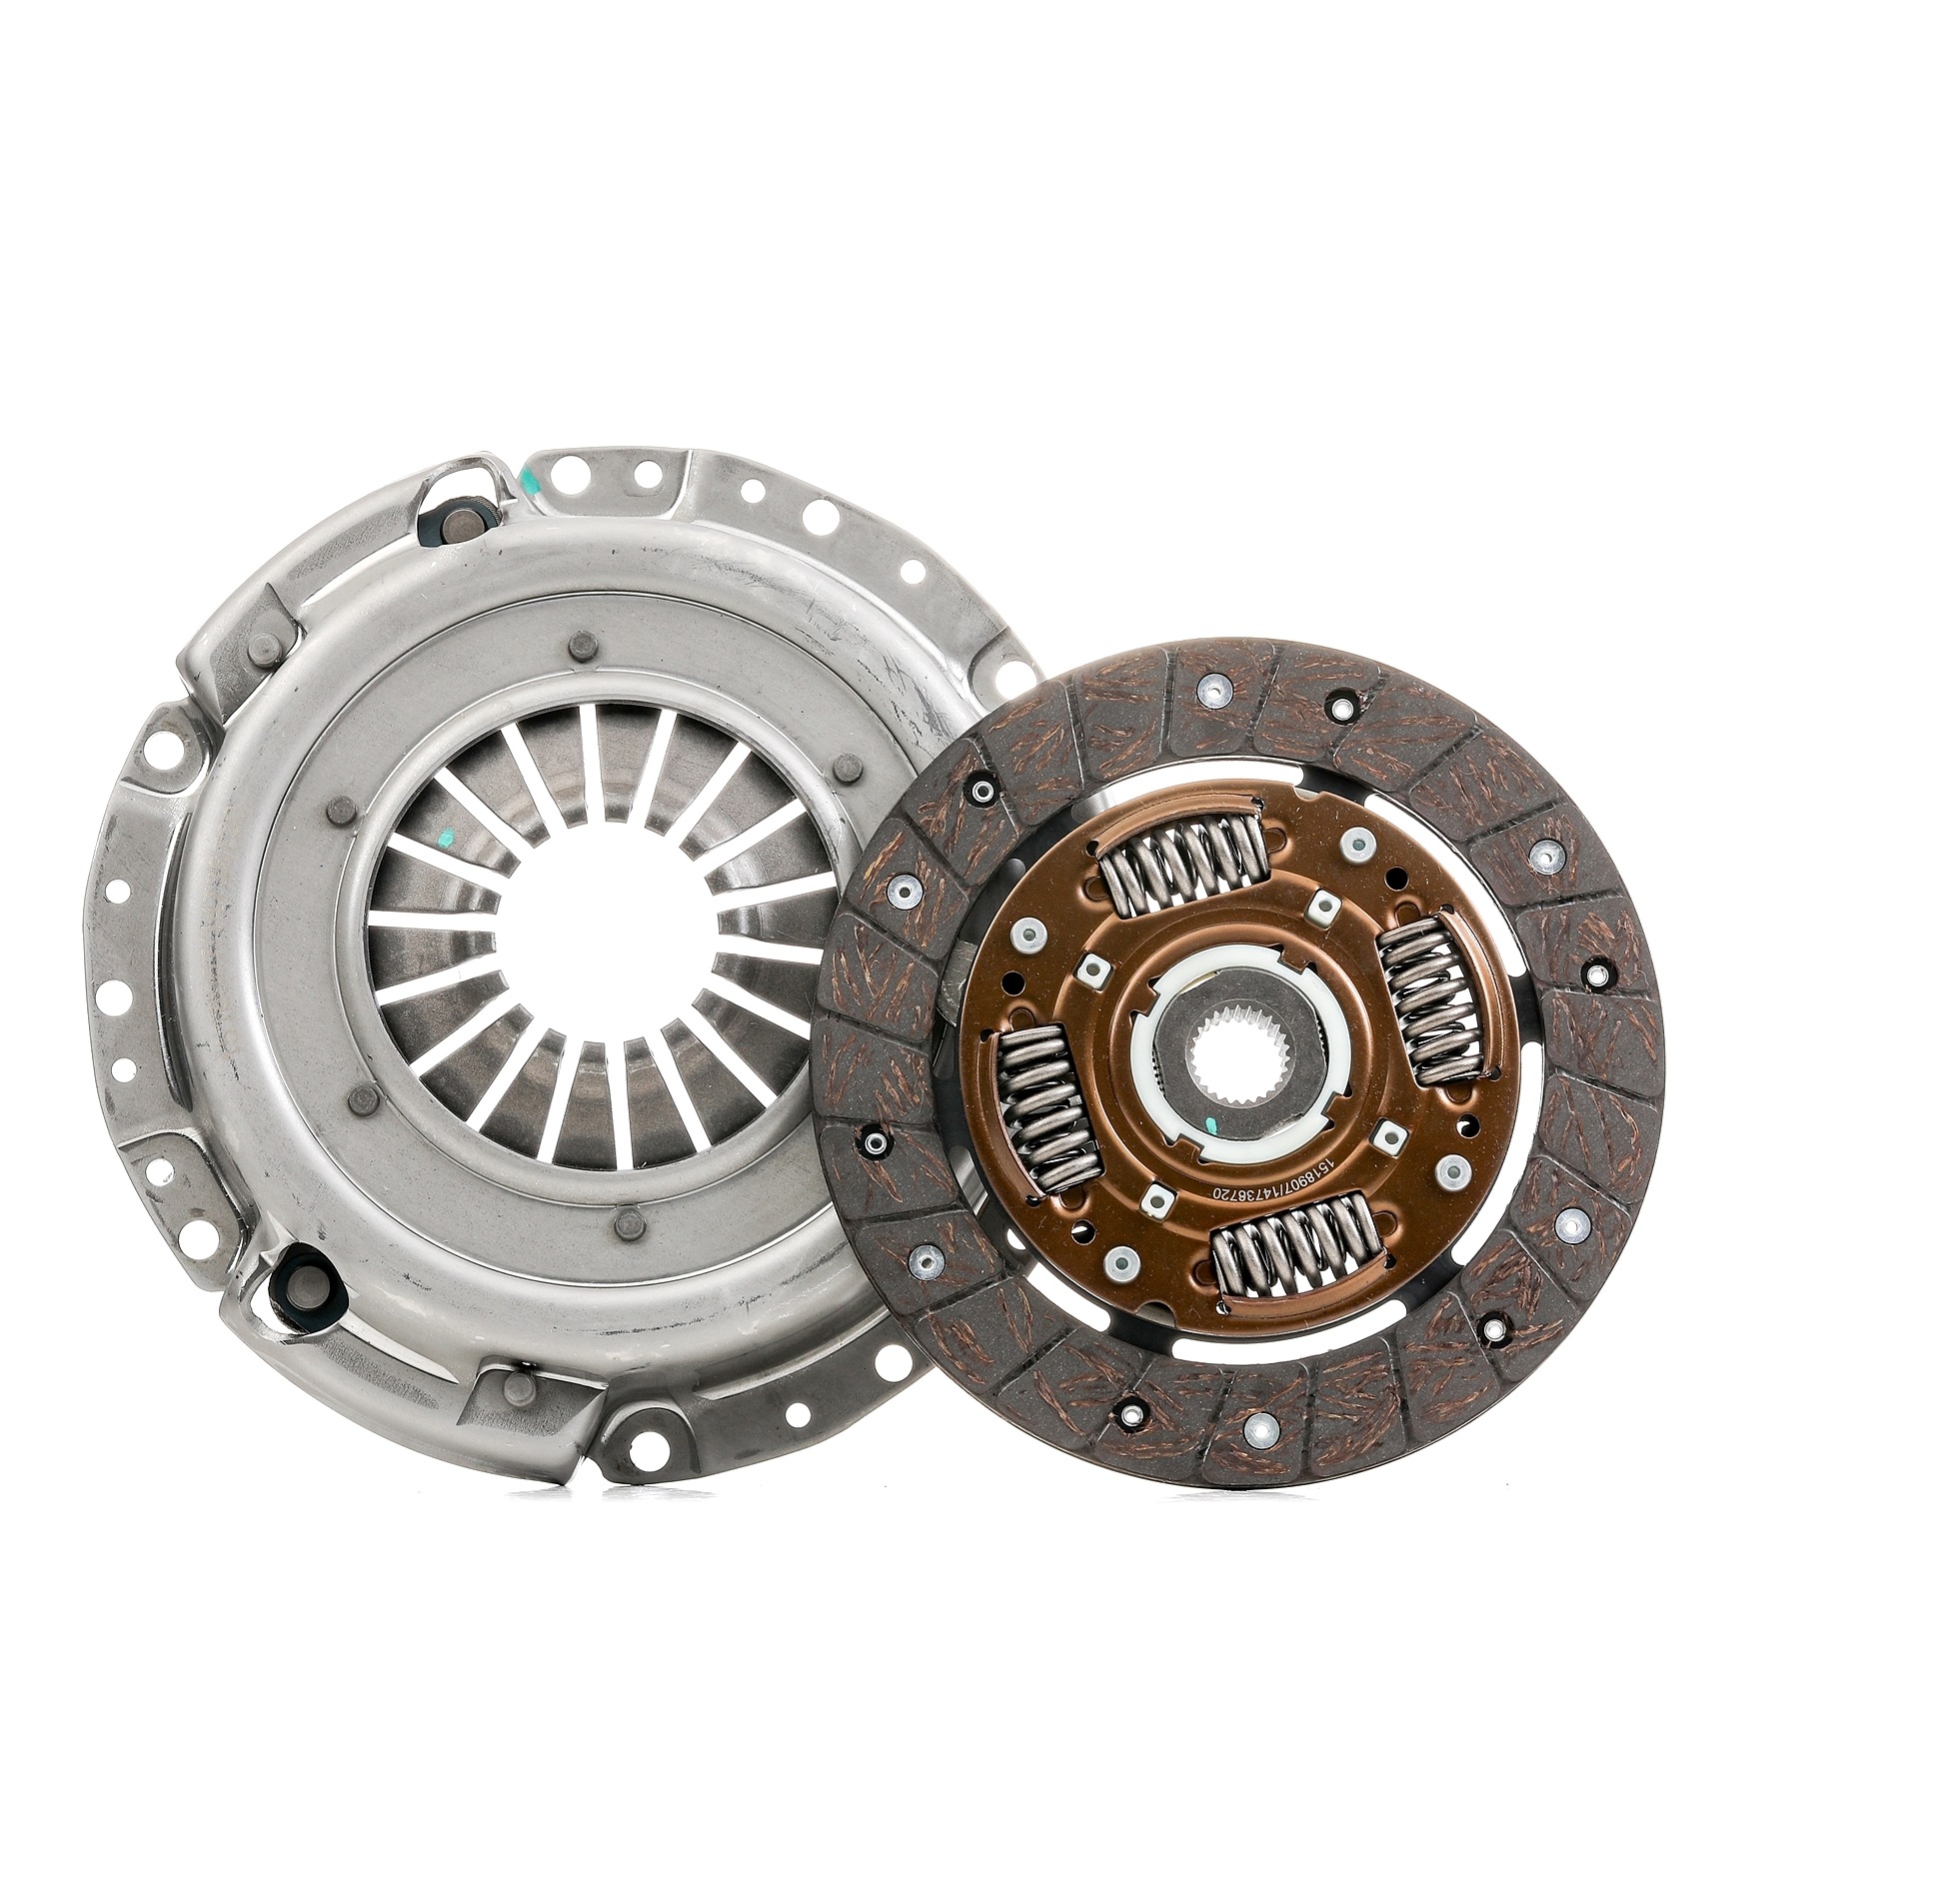 RIDEX 479C0238 Clutch kit with clutch pressure plate, with clutch disc, without clutch release bearing, 190mm